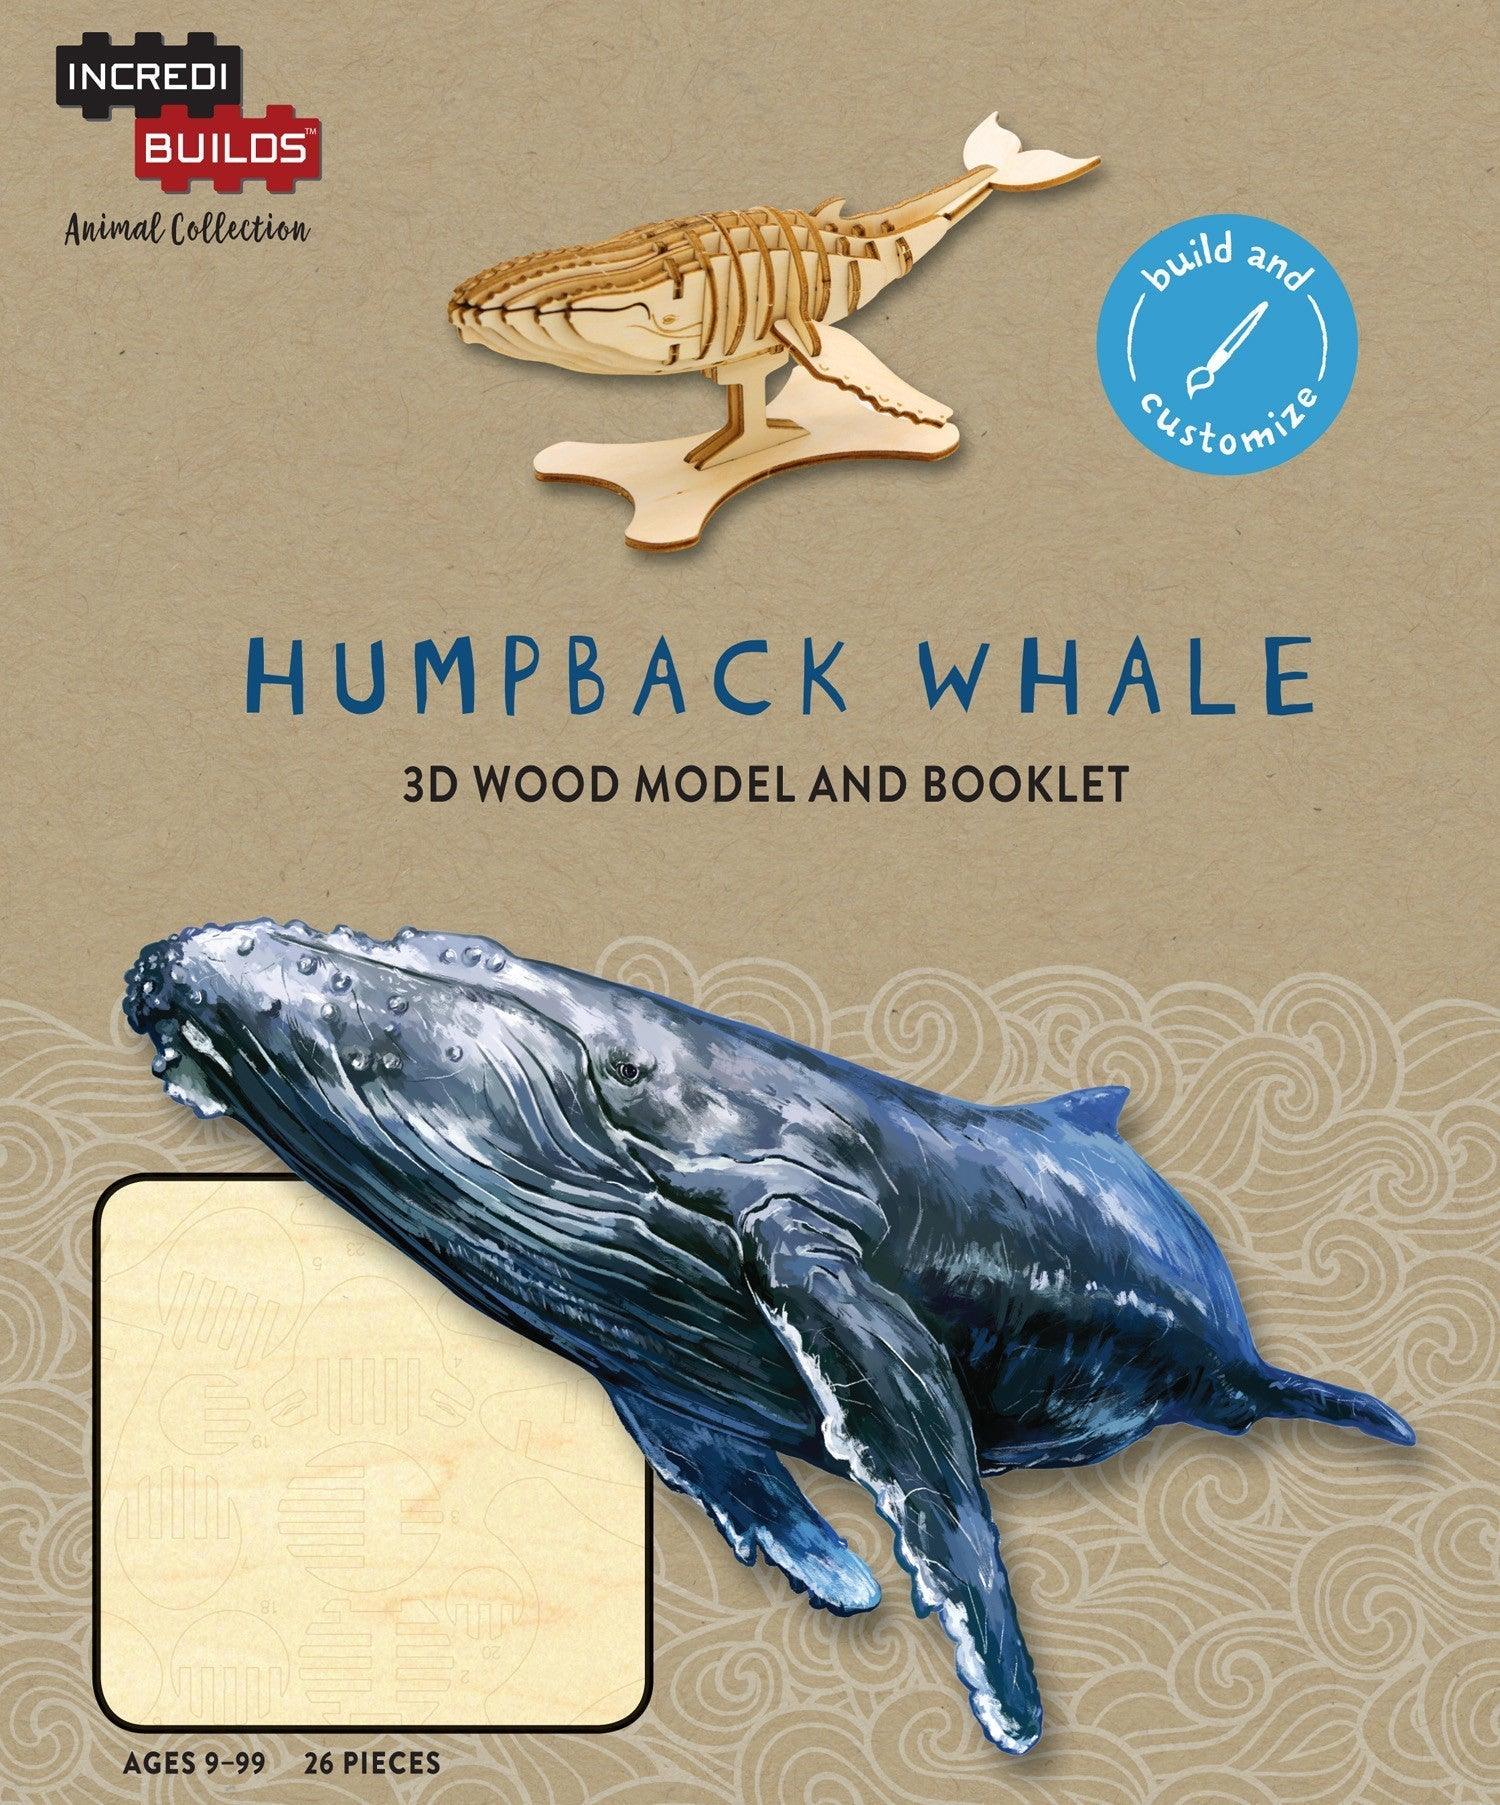 VR-49767 Incredibuilds Animal Collection Humpback Whale - Insight Editions - Titan Pop Culture